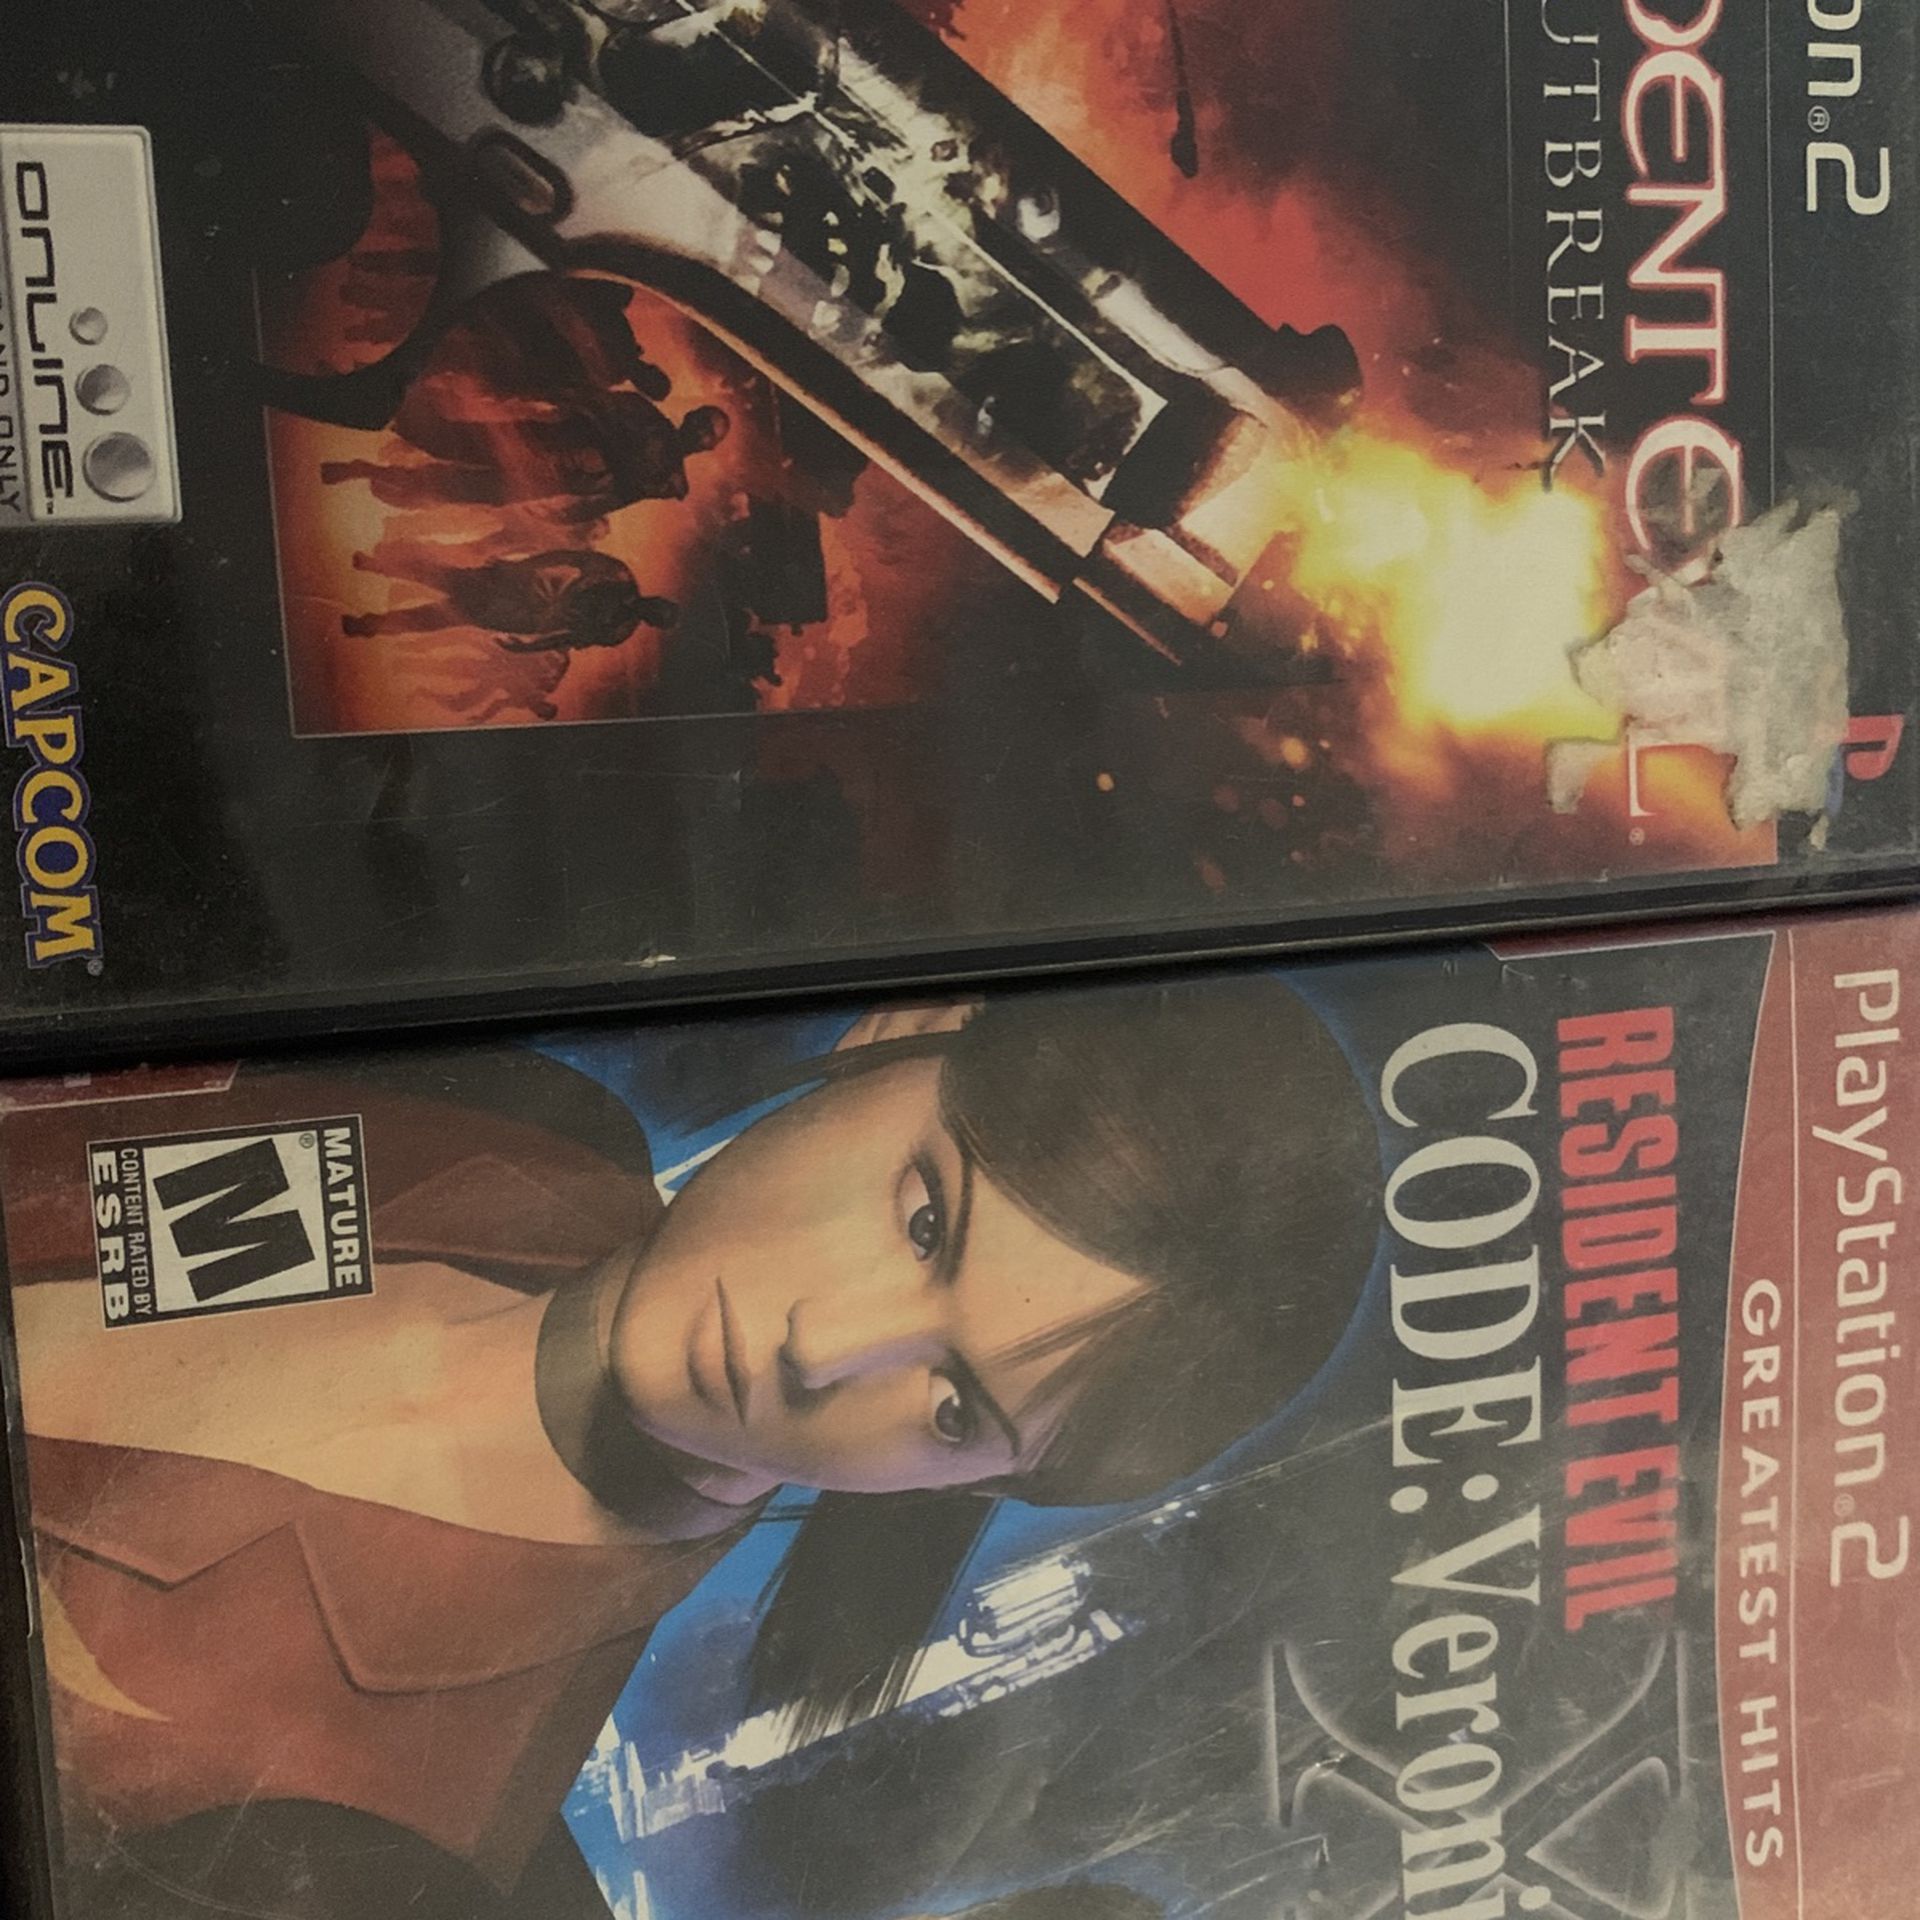 Resident Evil Ps2 Collection